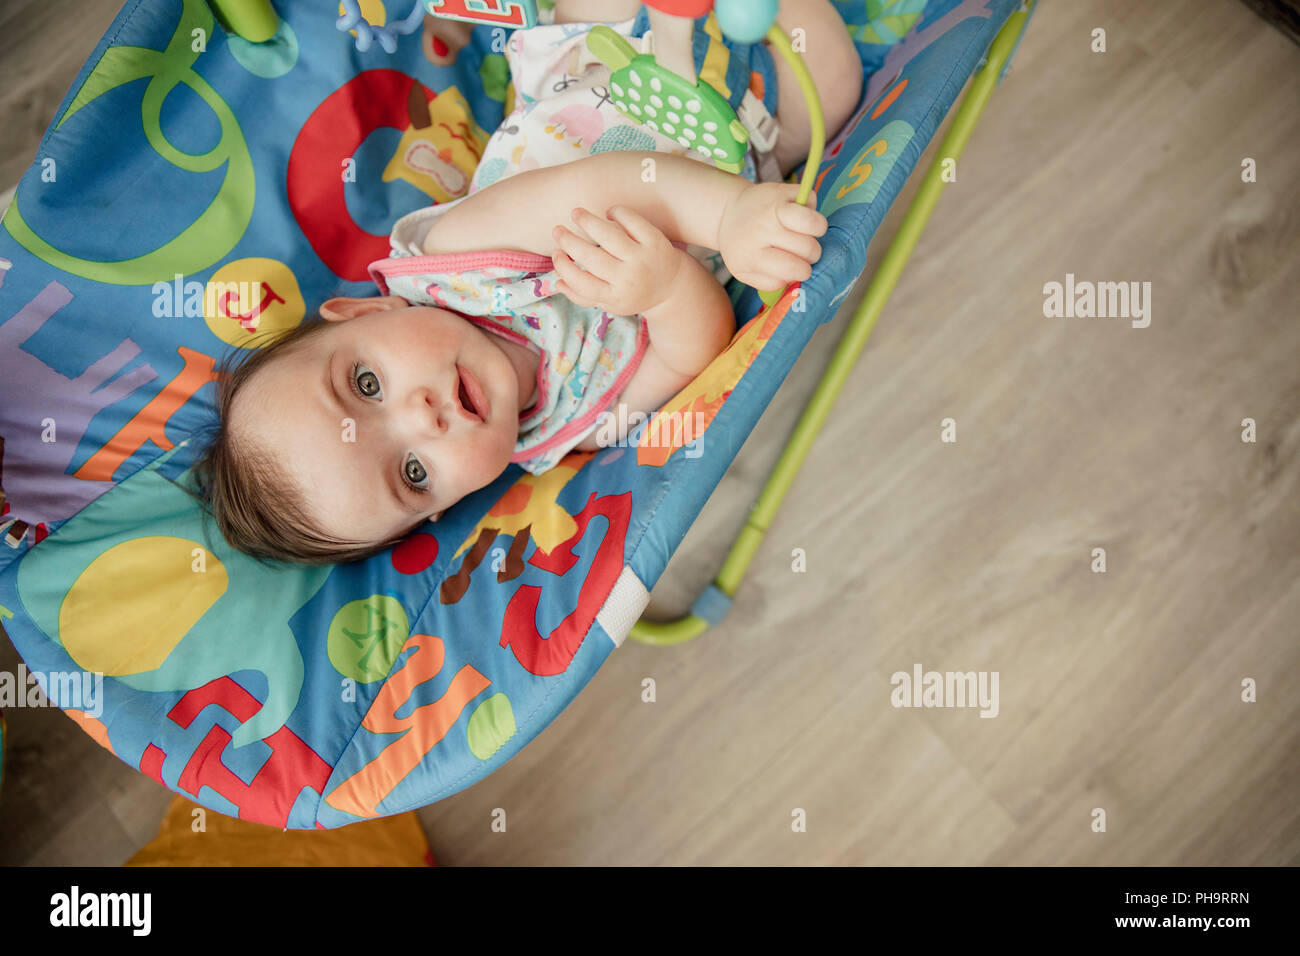 High angle view looking down onto a baby girl relaxing in her baby bouncer. The baby is looking up into the camera and smiling. Stock Photo